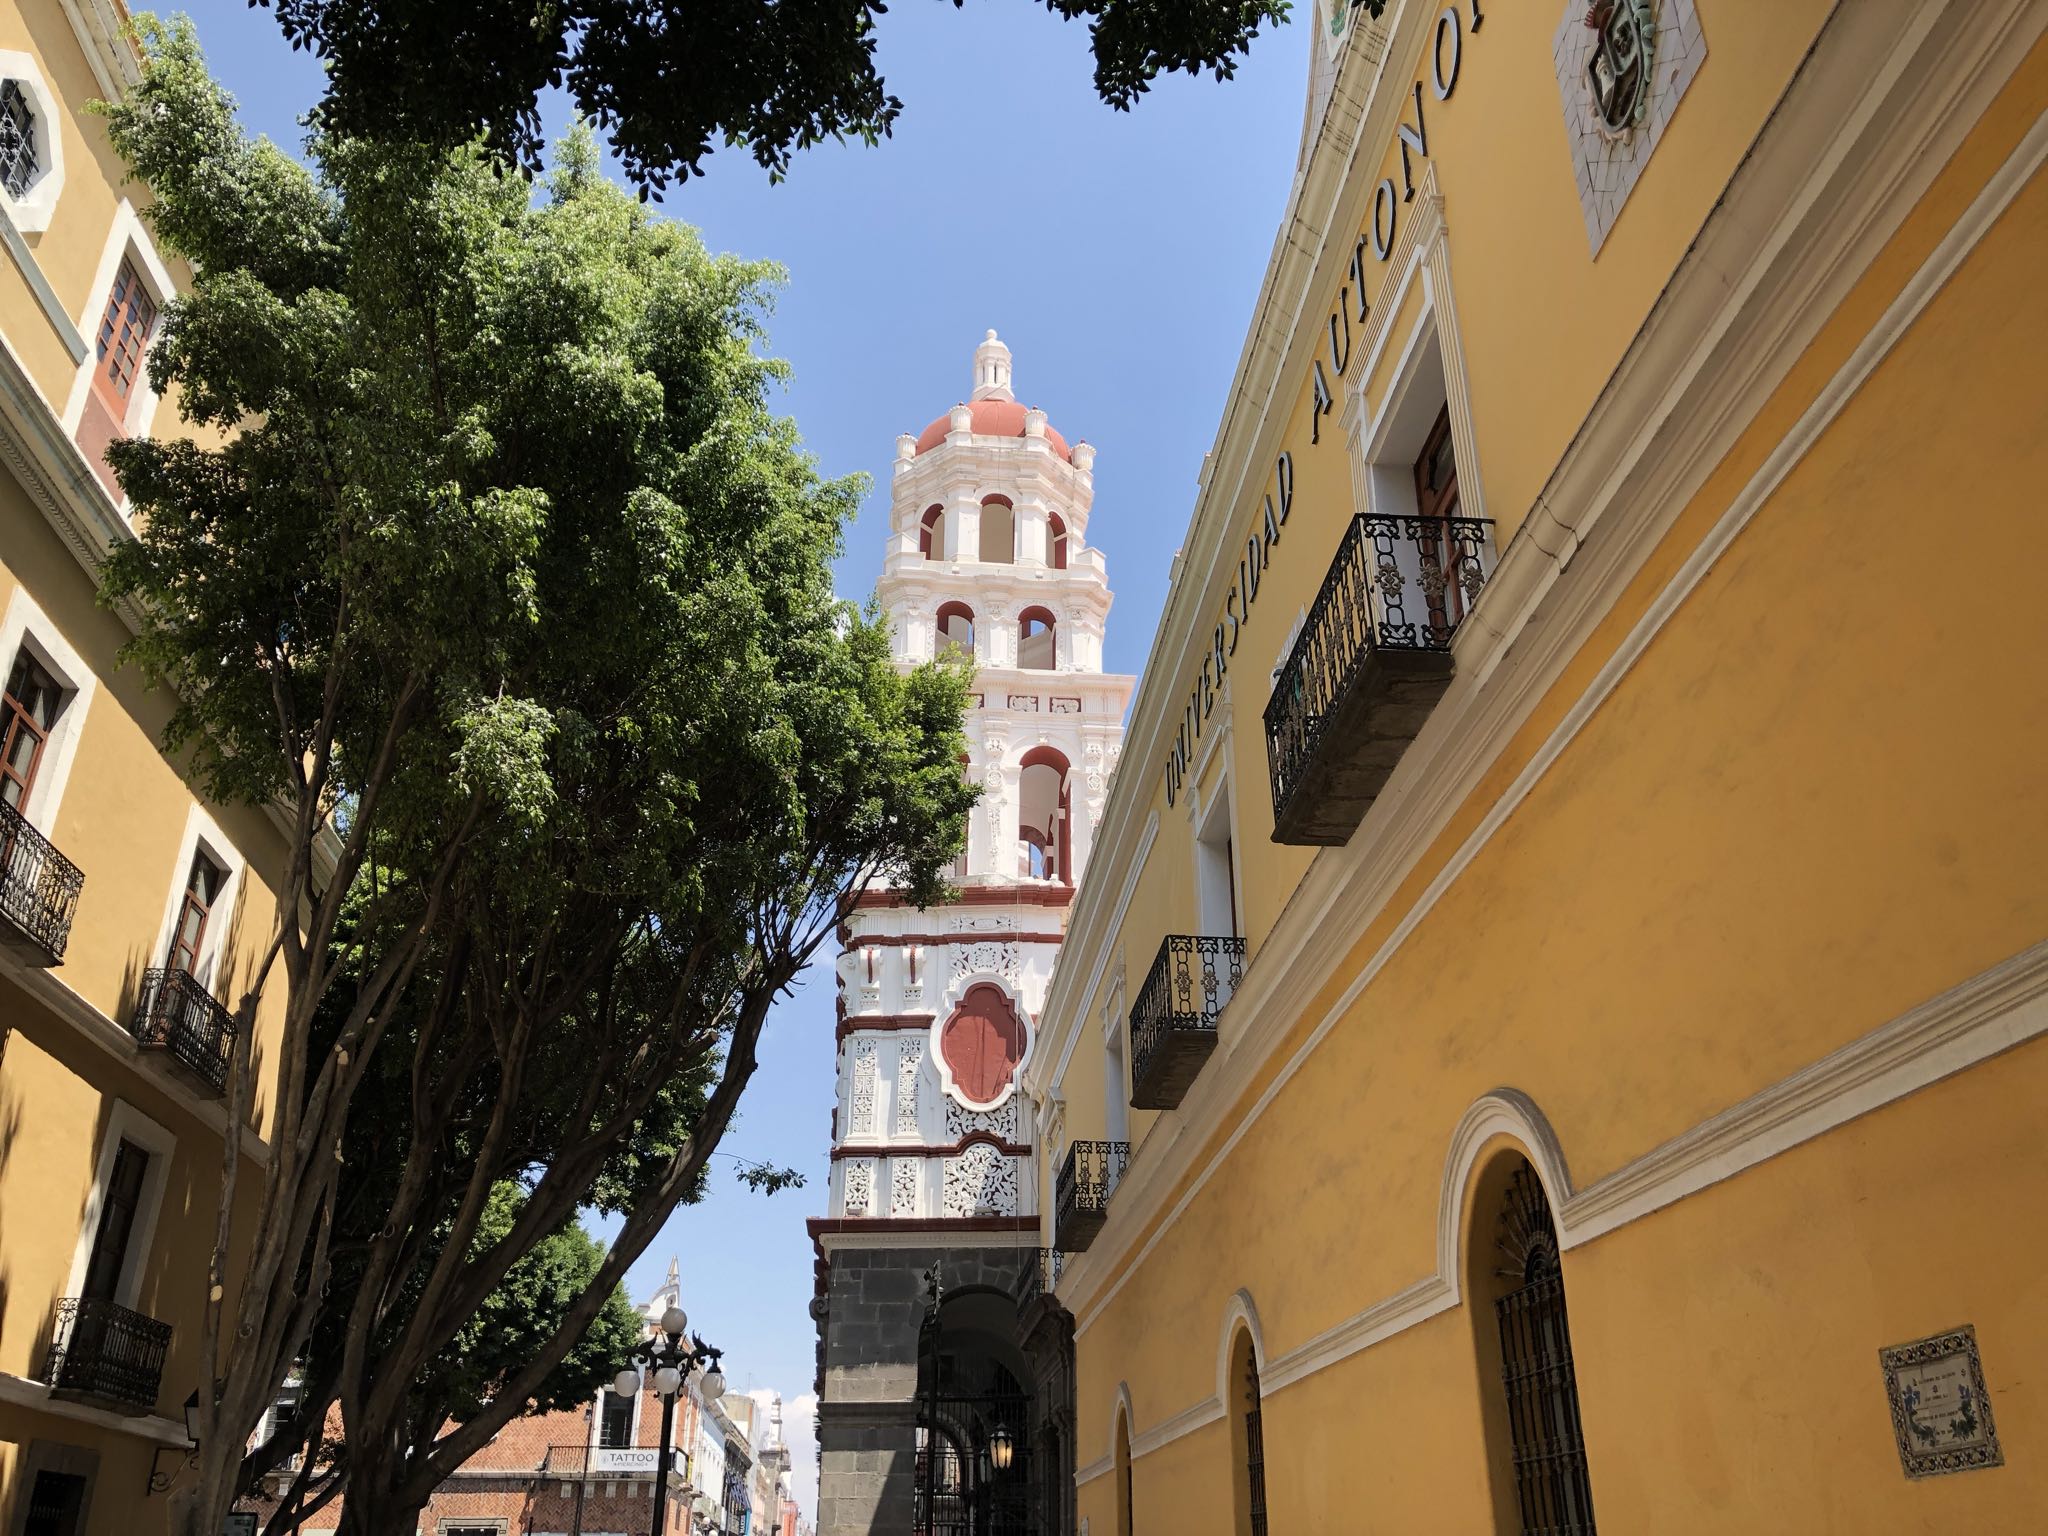 Photo 79 of 362 from the album Highlights Mexico 2019.